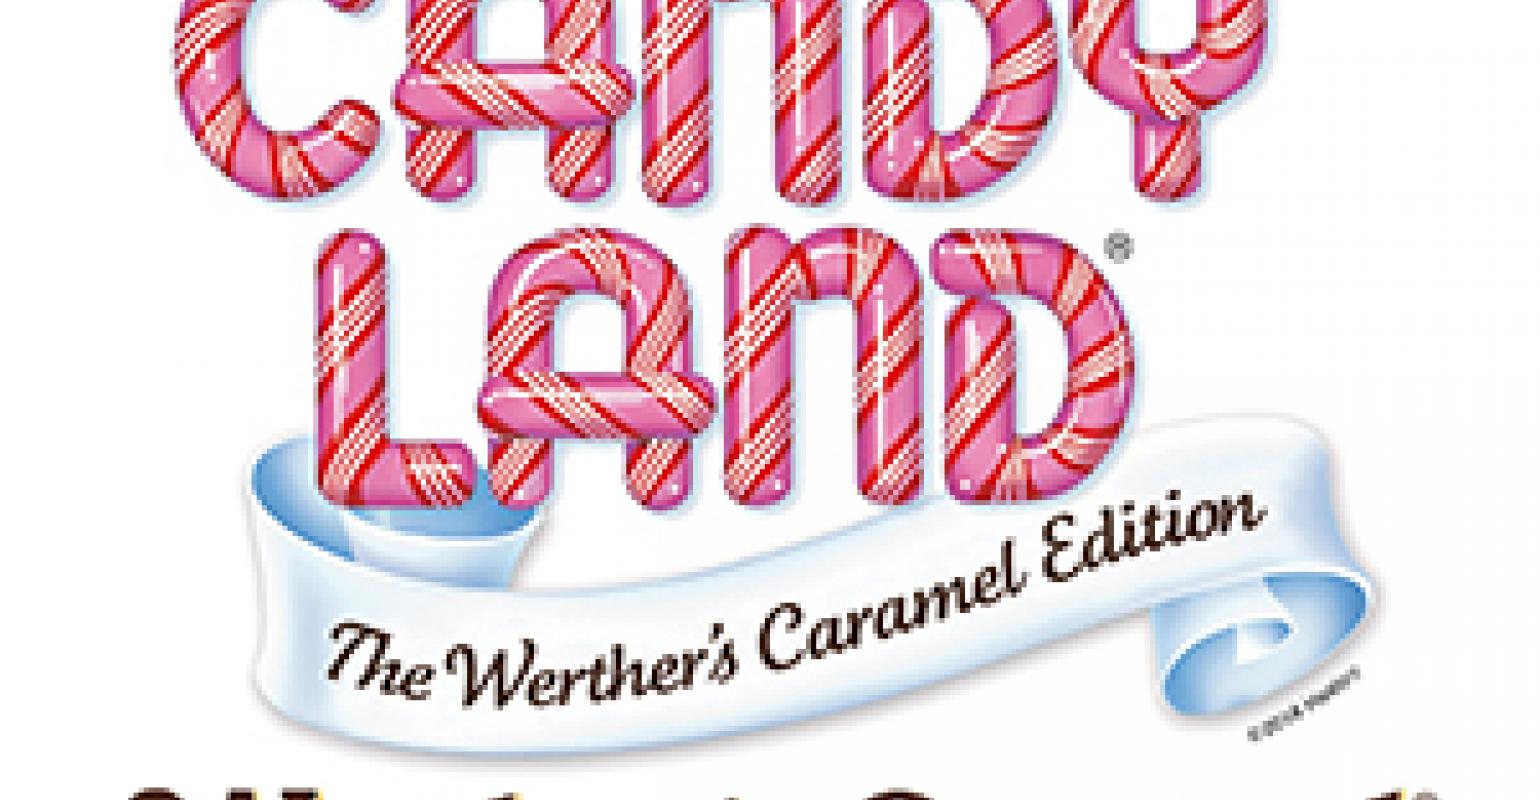 candy land free download hasbro